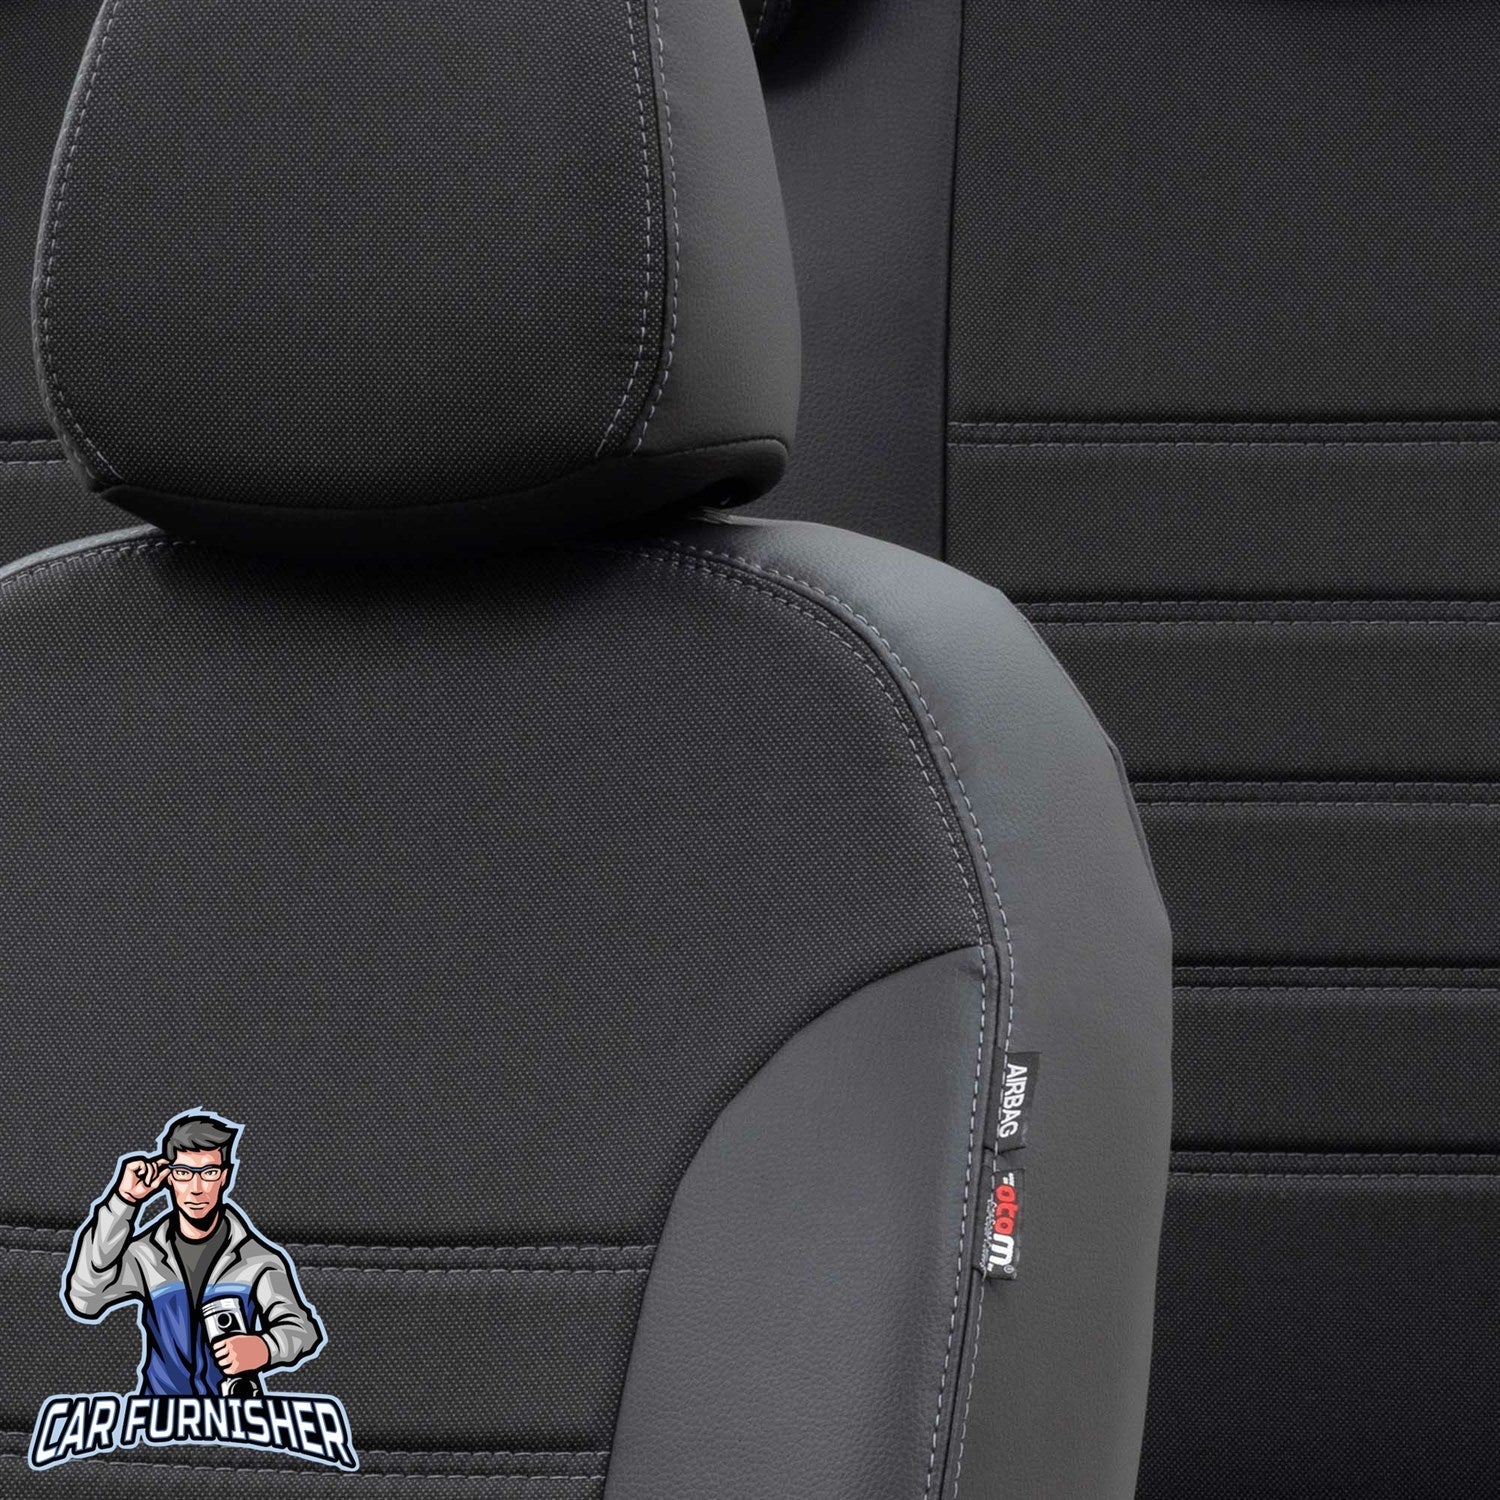 Geely Emgrand Seat Covers Paris Leather & Jacquard Design Black Leather & Jacquard Fabric